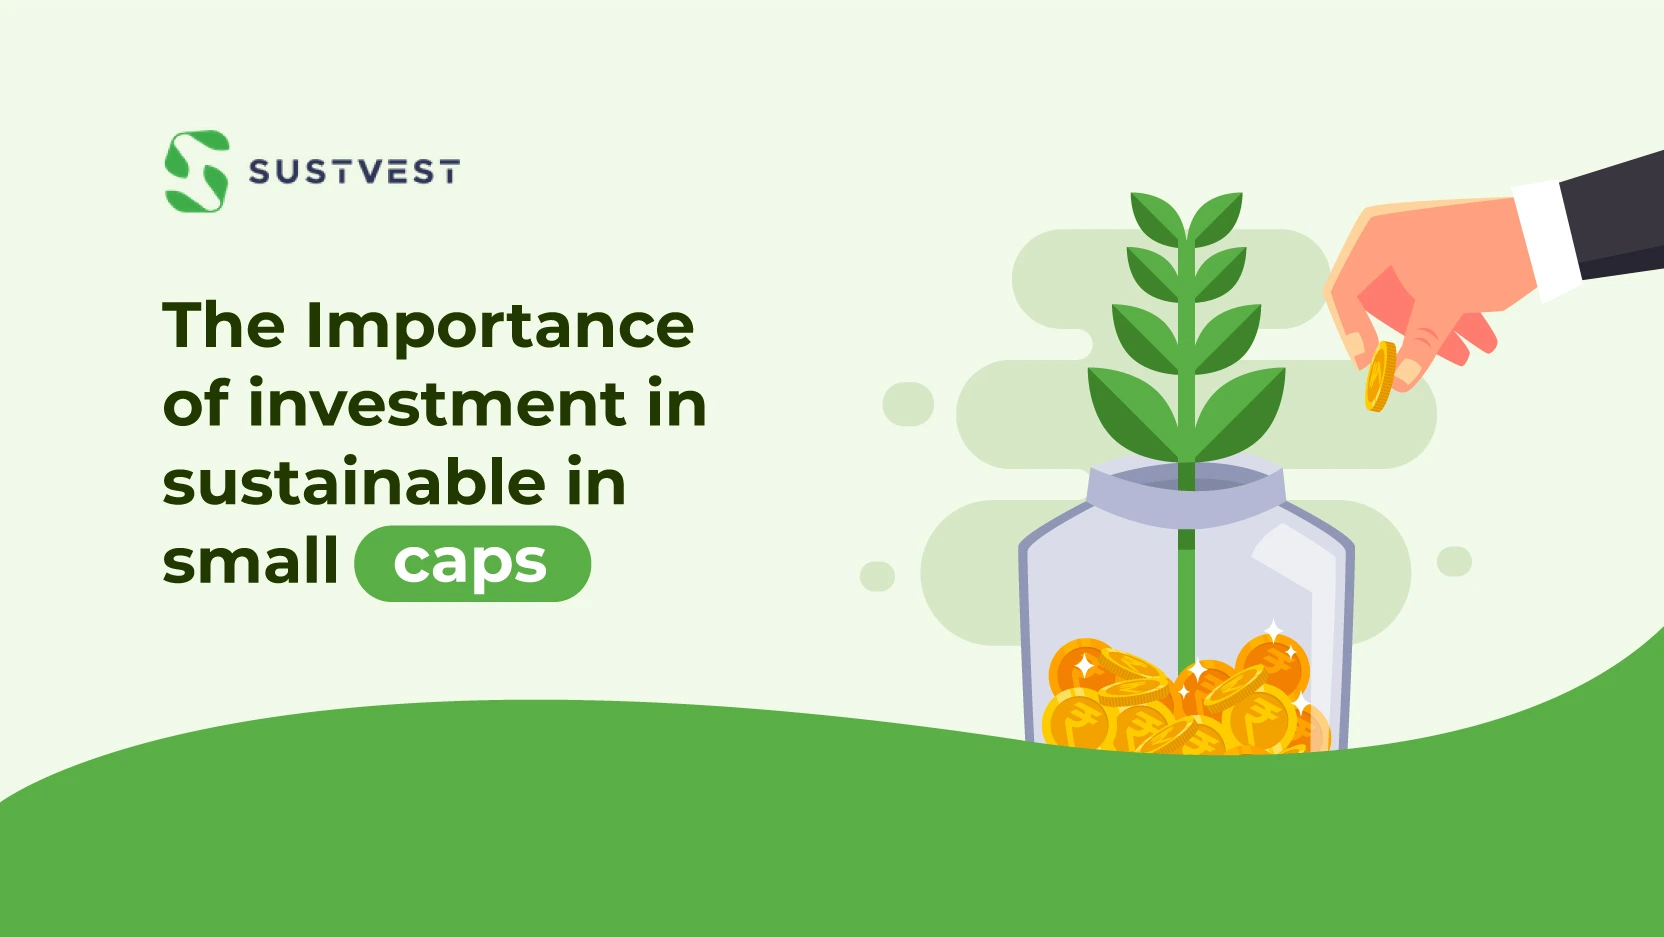 Investment in sustainability